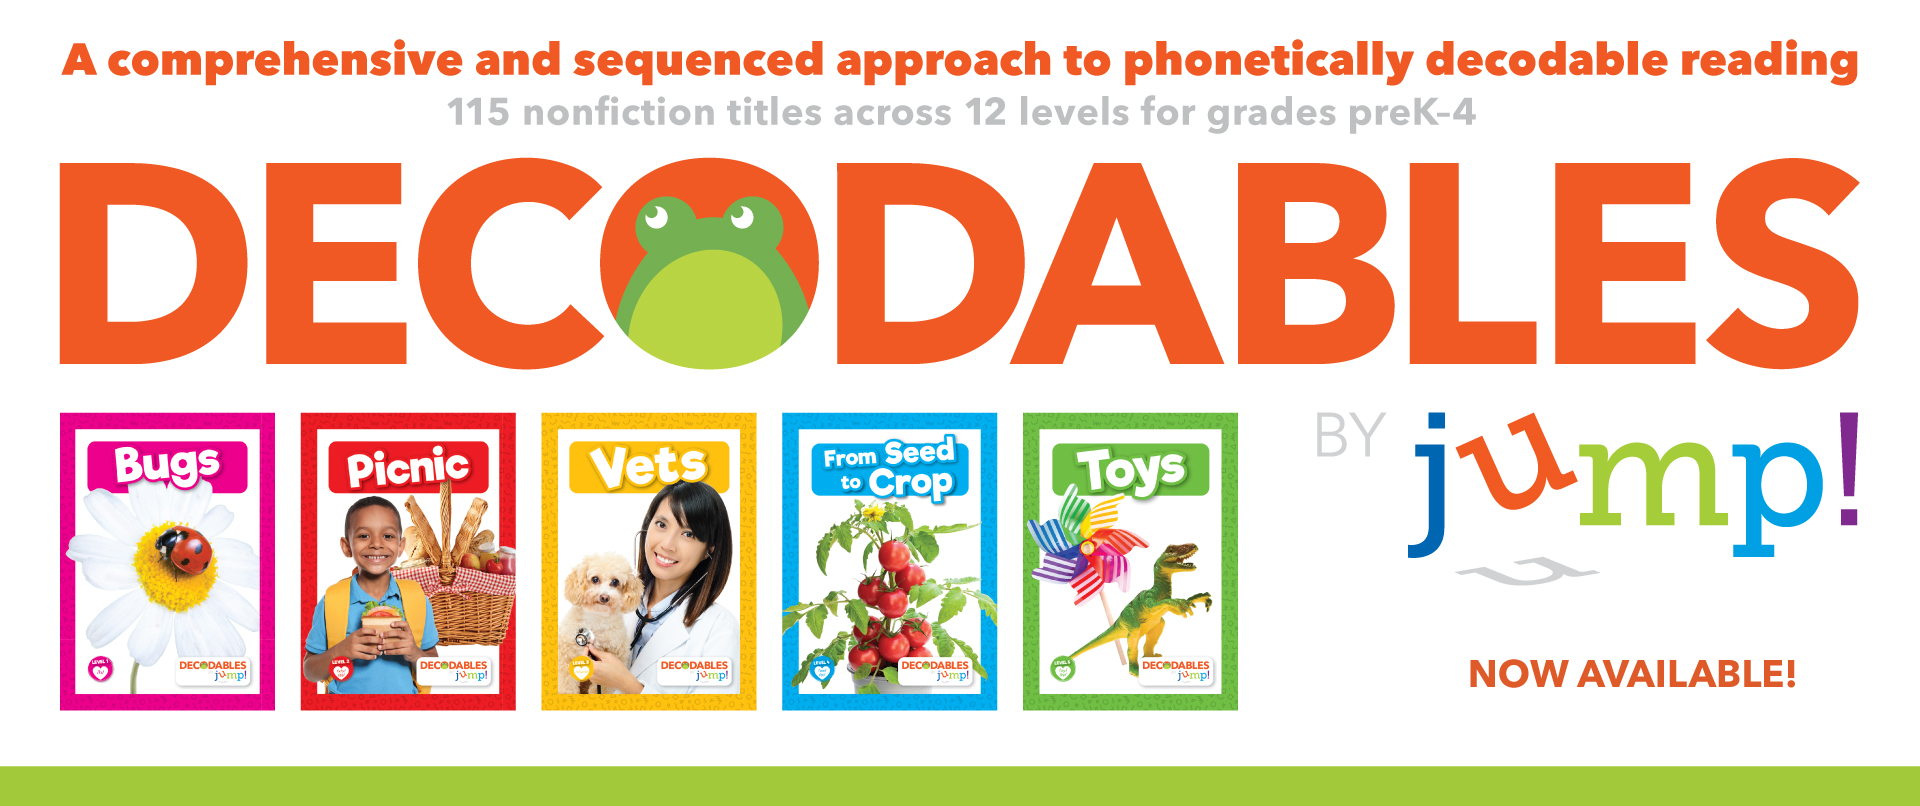 Decodables: A comprehensive and sequenced approach to phonetically decodable reading